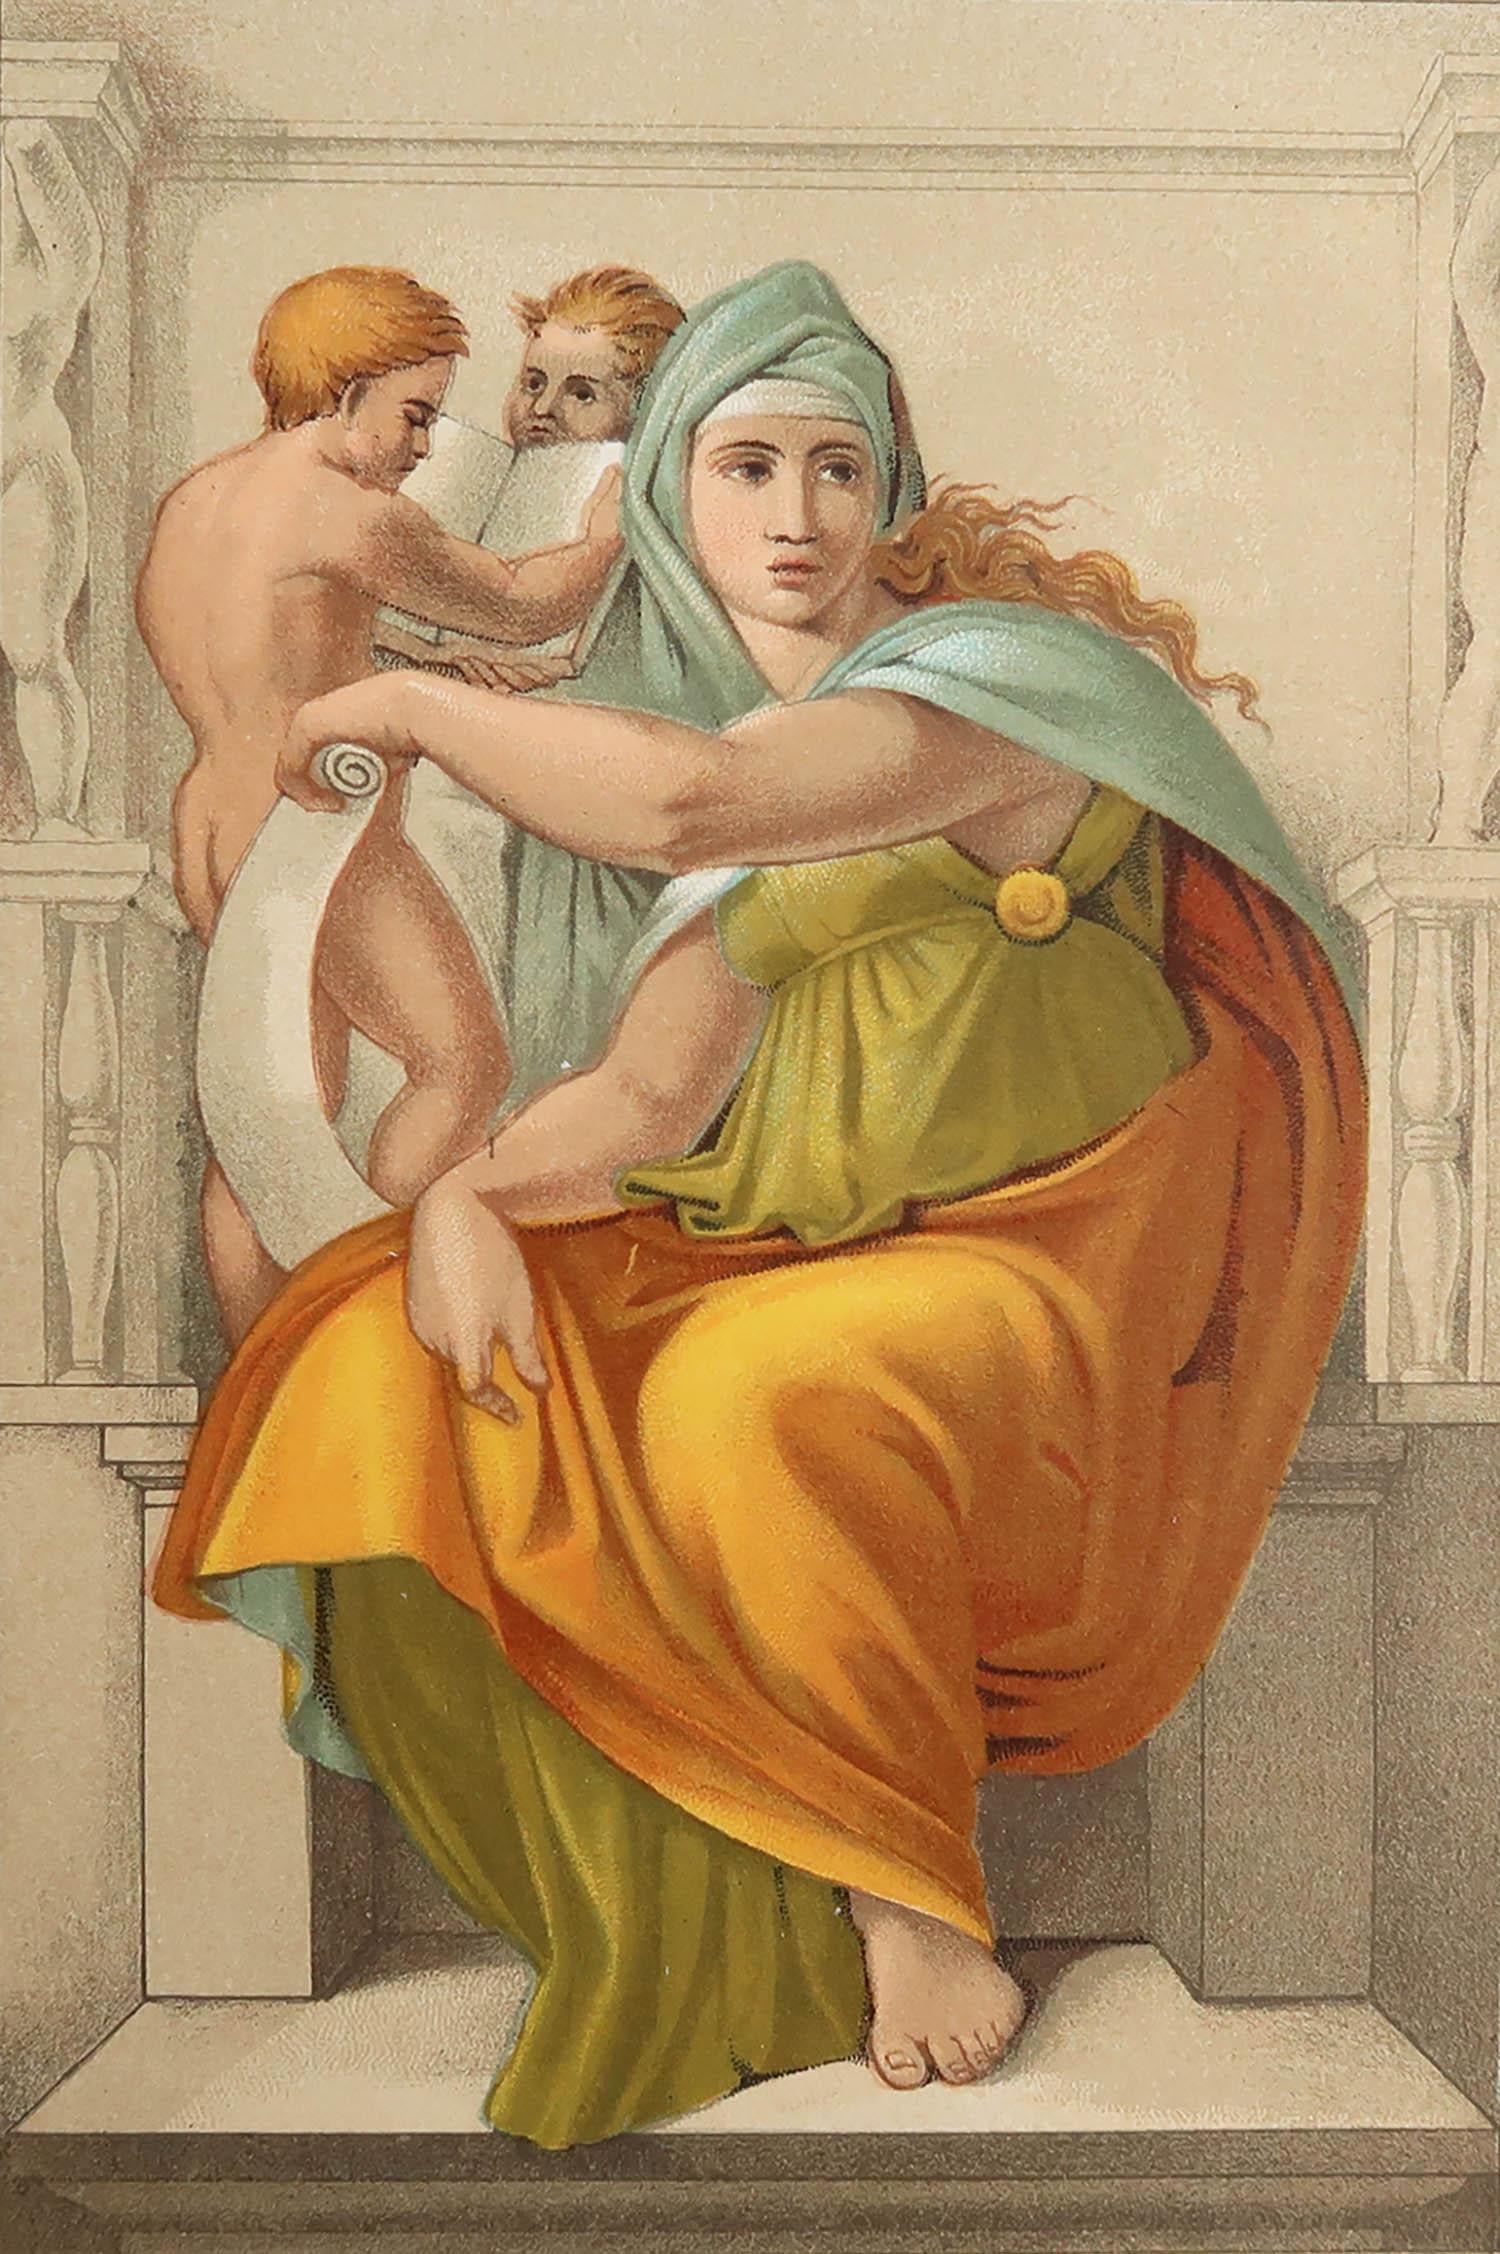 Wonderful print of The Sibyl of Delphi

Chromo-lithograph

Published by W.Mackenzie. C.1880

Original colour

Unframed.

Free shipping.








